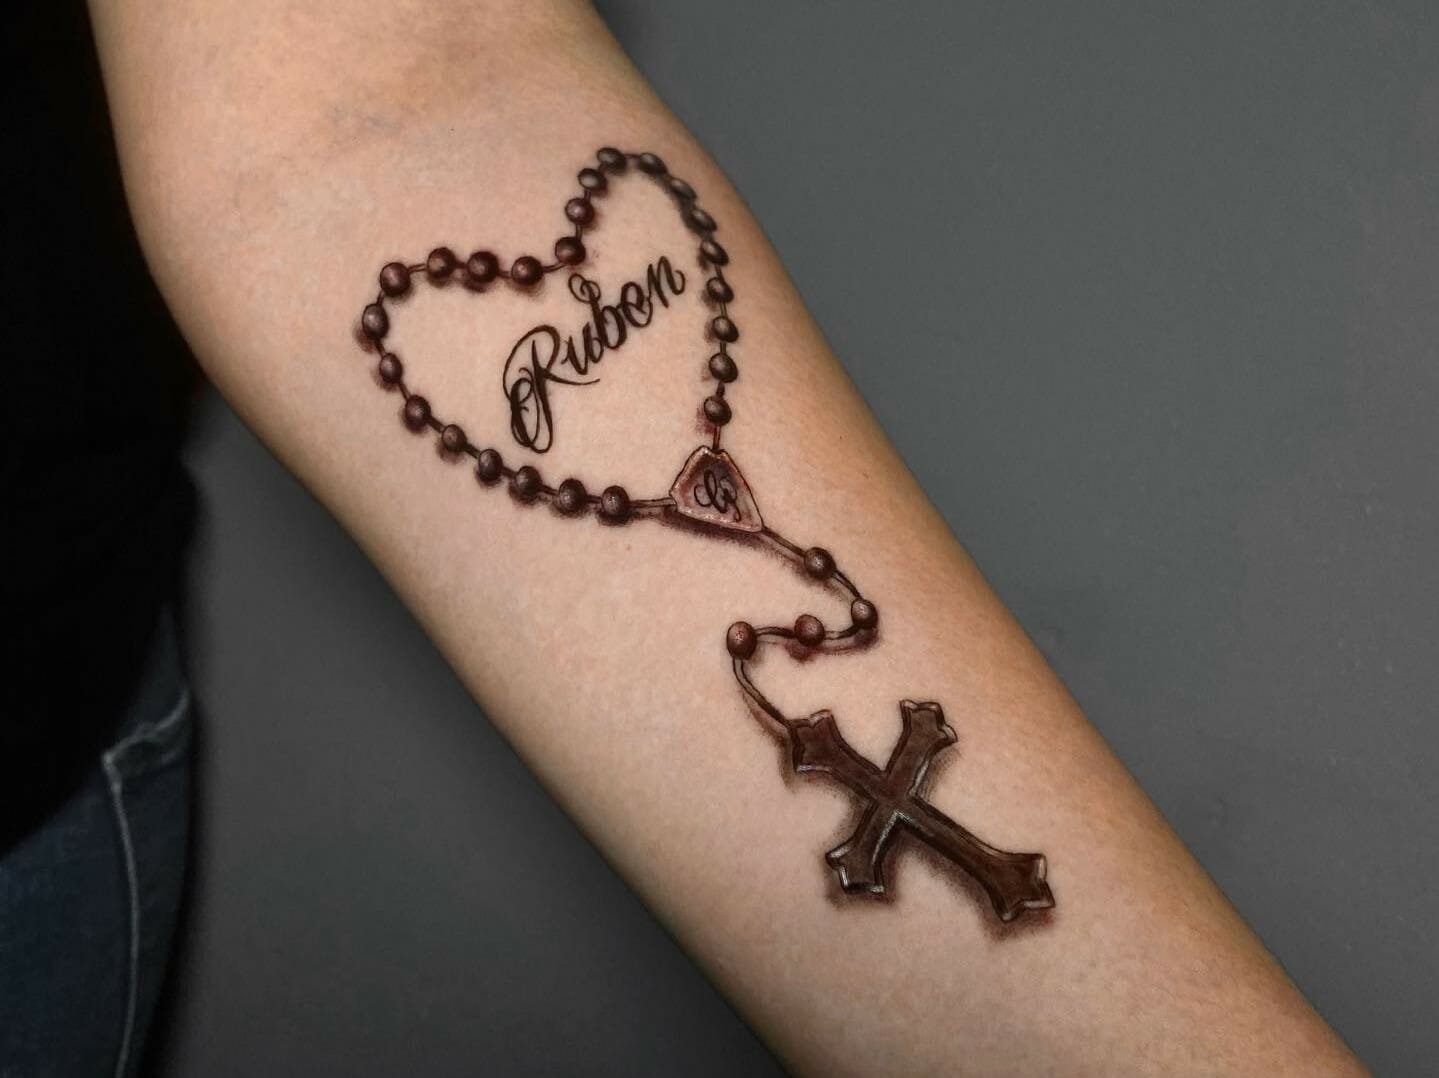 Rosary Tattoo Ideas and Designs for the Hand, Arm, and Body | Wrist tattoos  for women, Hand tattoos for women, Tattoos for women